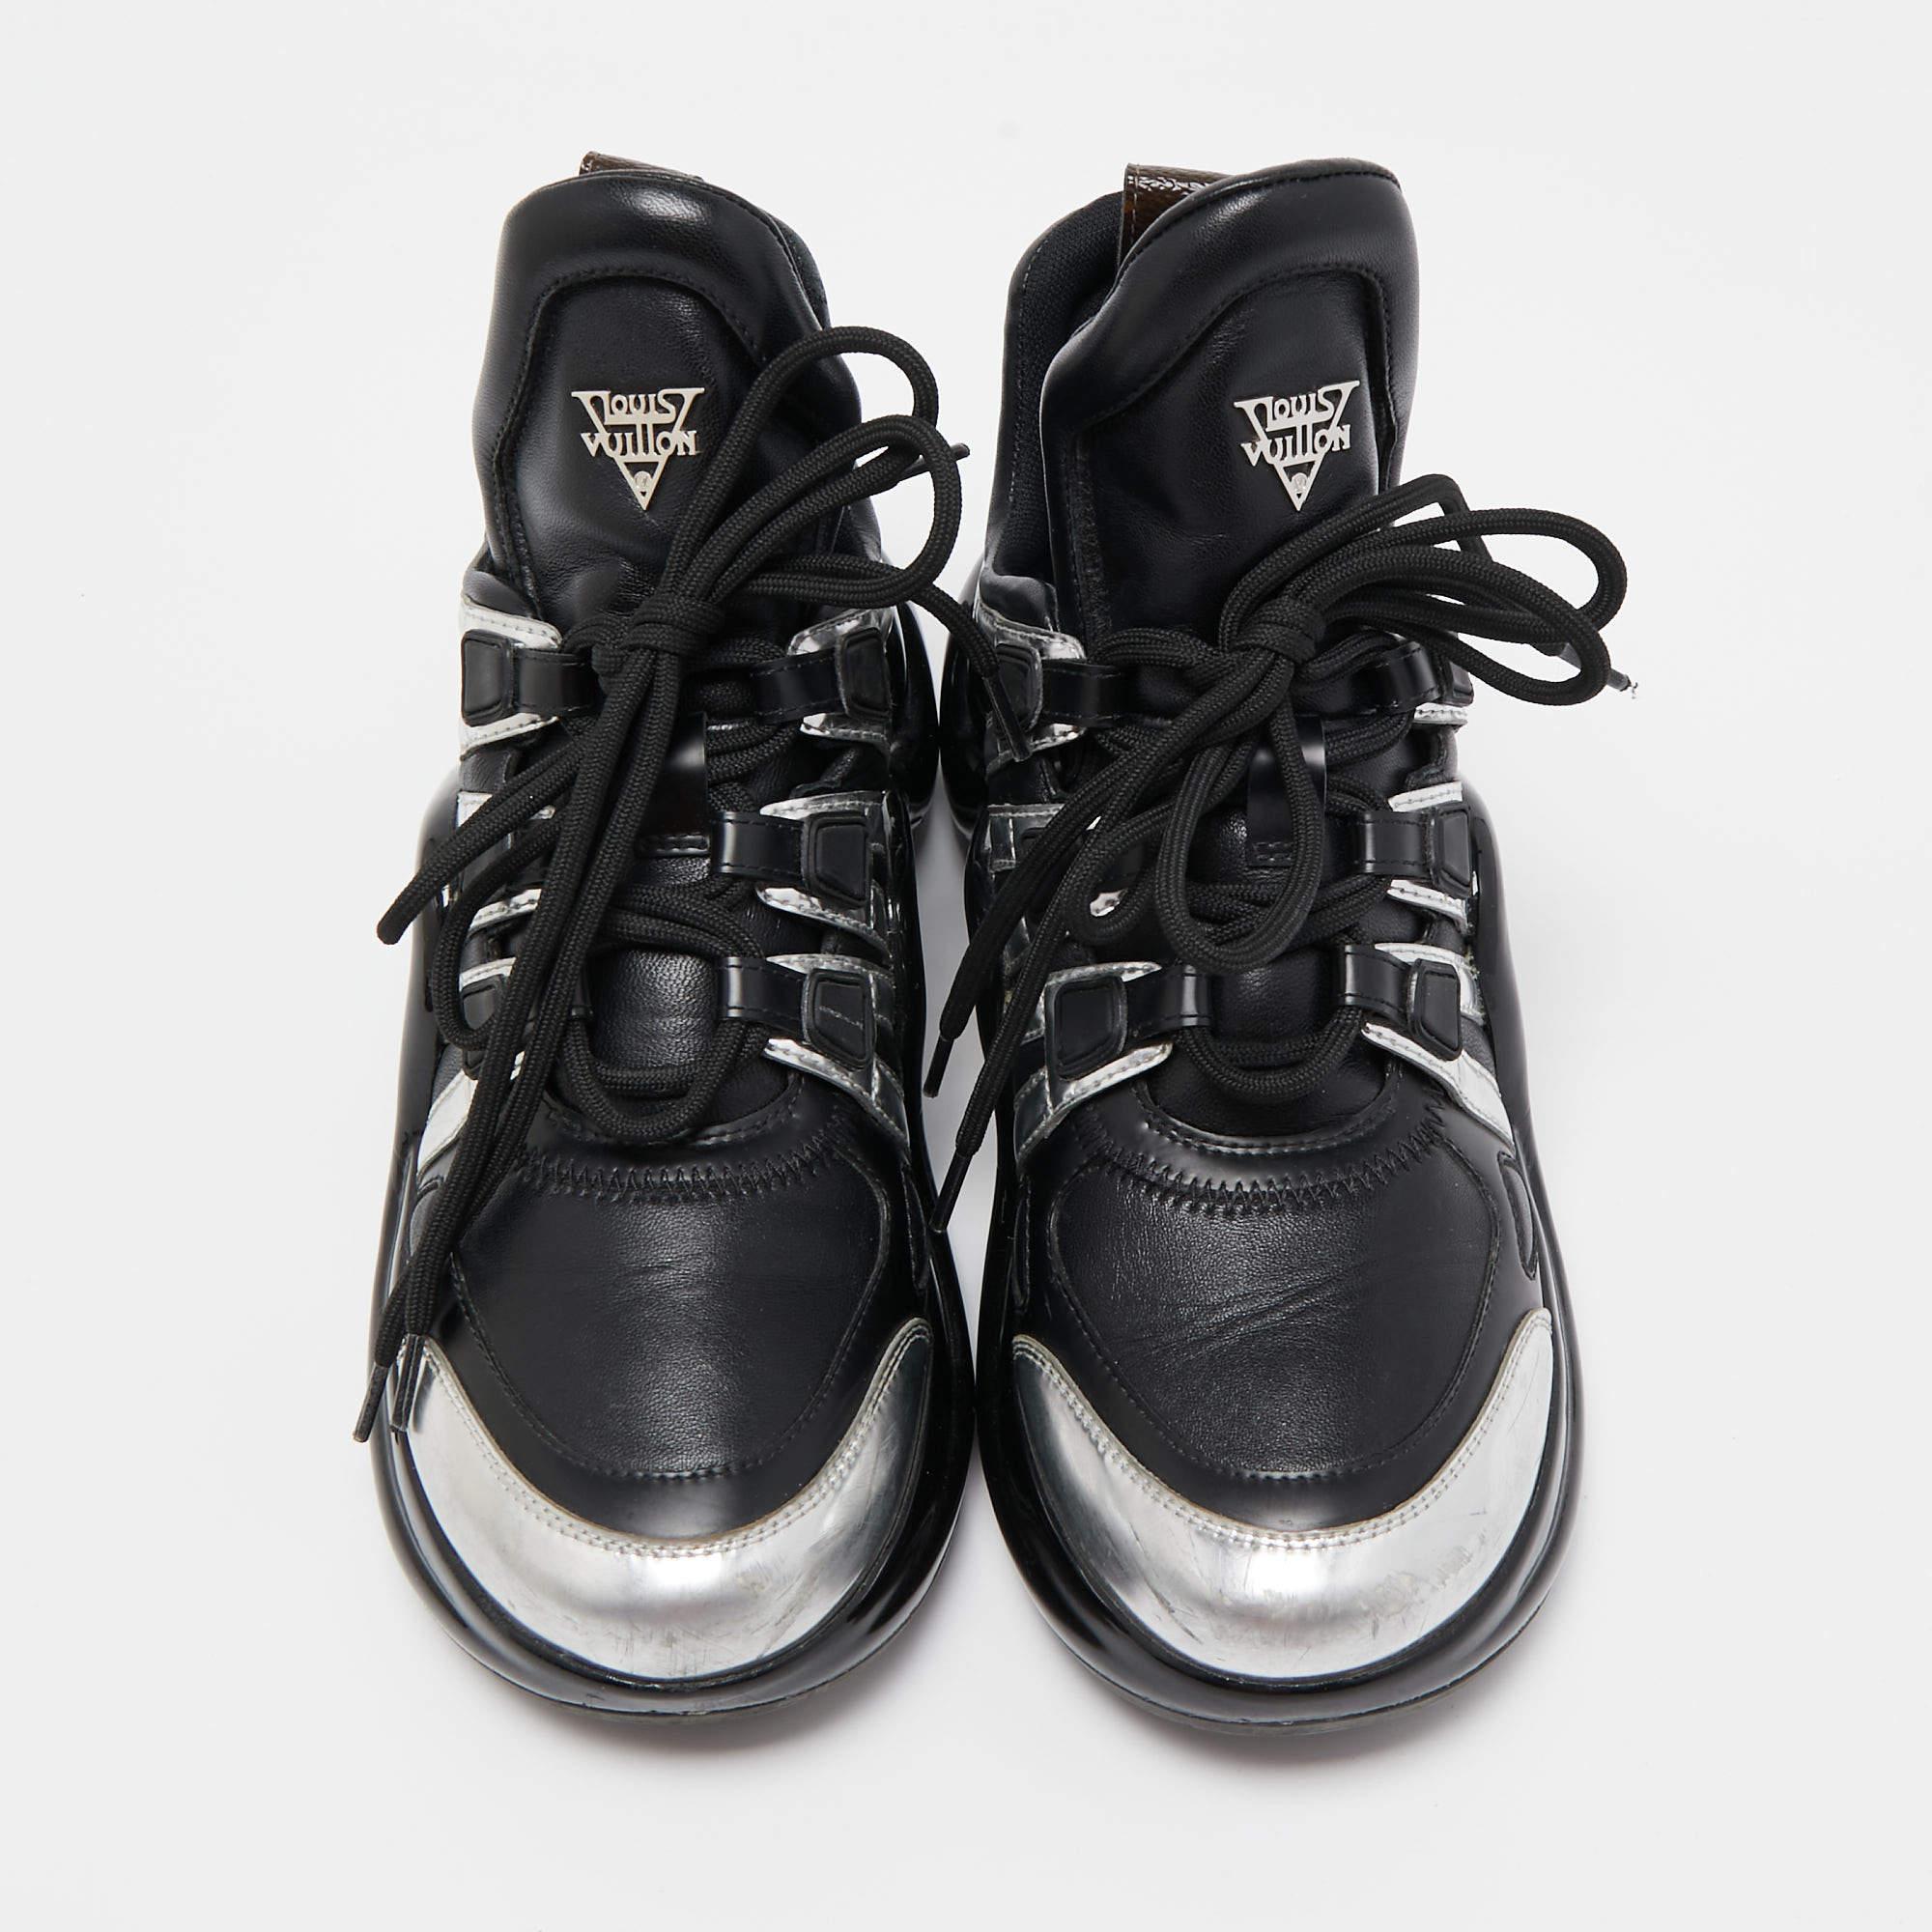 Louis Vuitton Black/Silver Leather Archlight Sneakers Size 38 For Sale 2